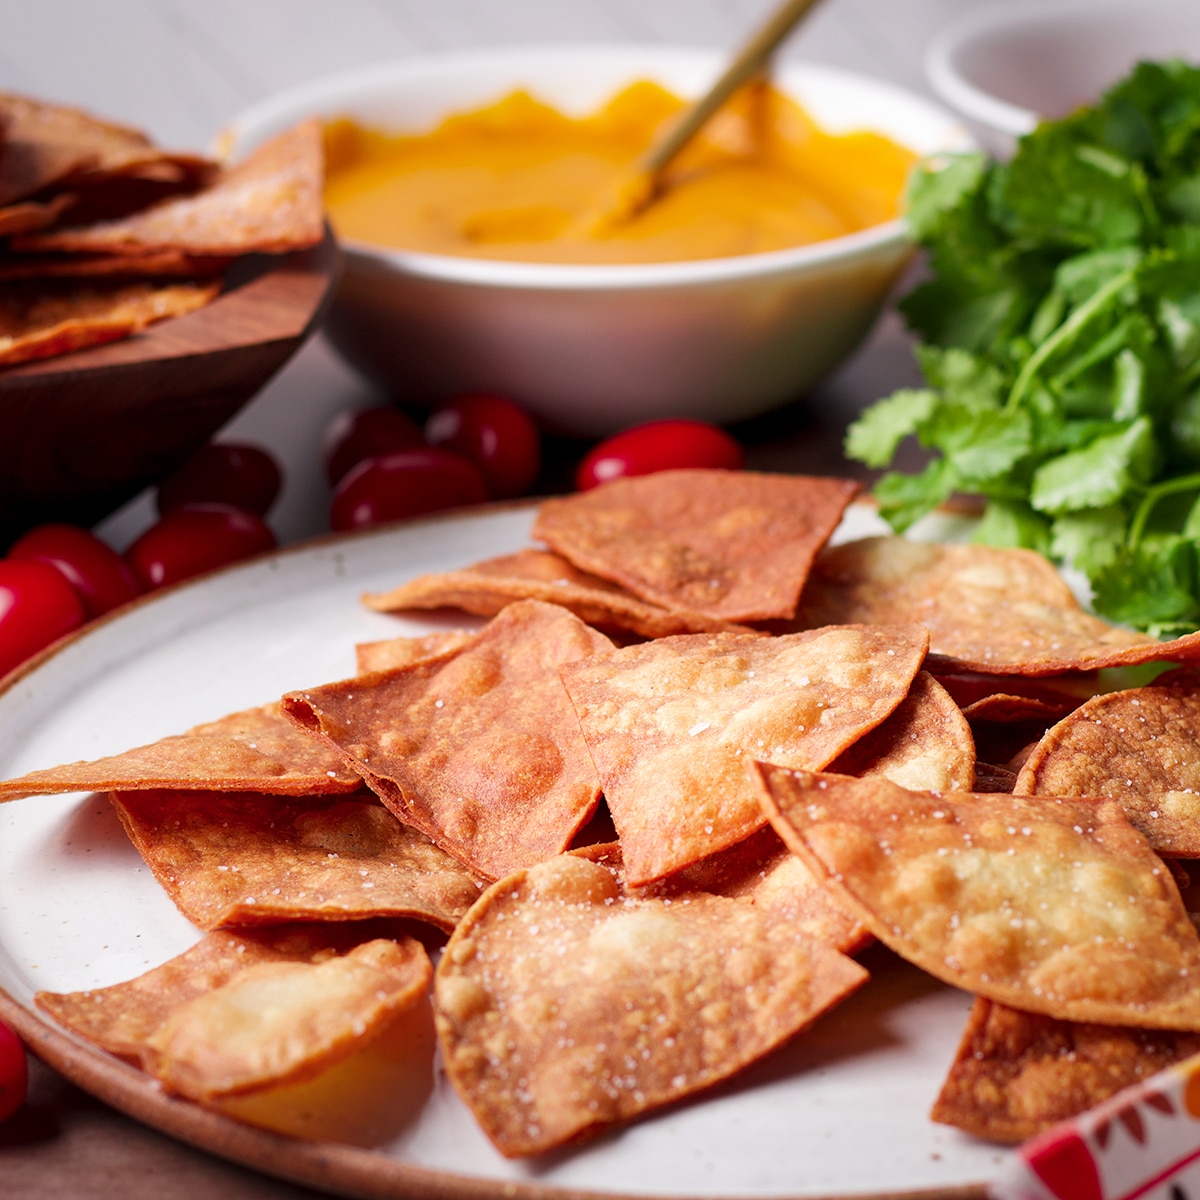 A plate filled with freshly baked homemade tortilla chips.